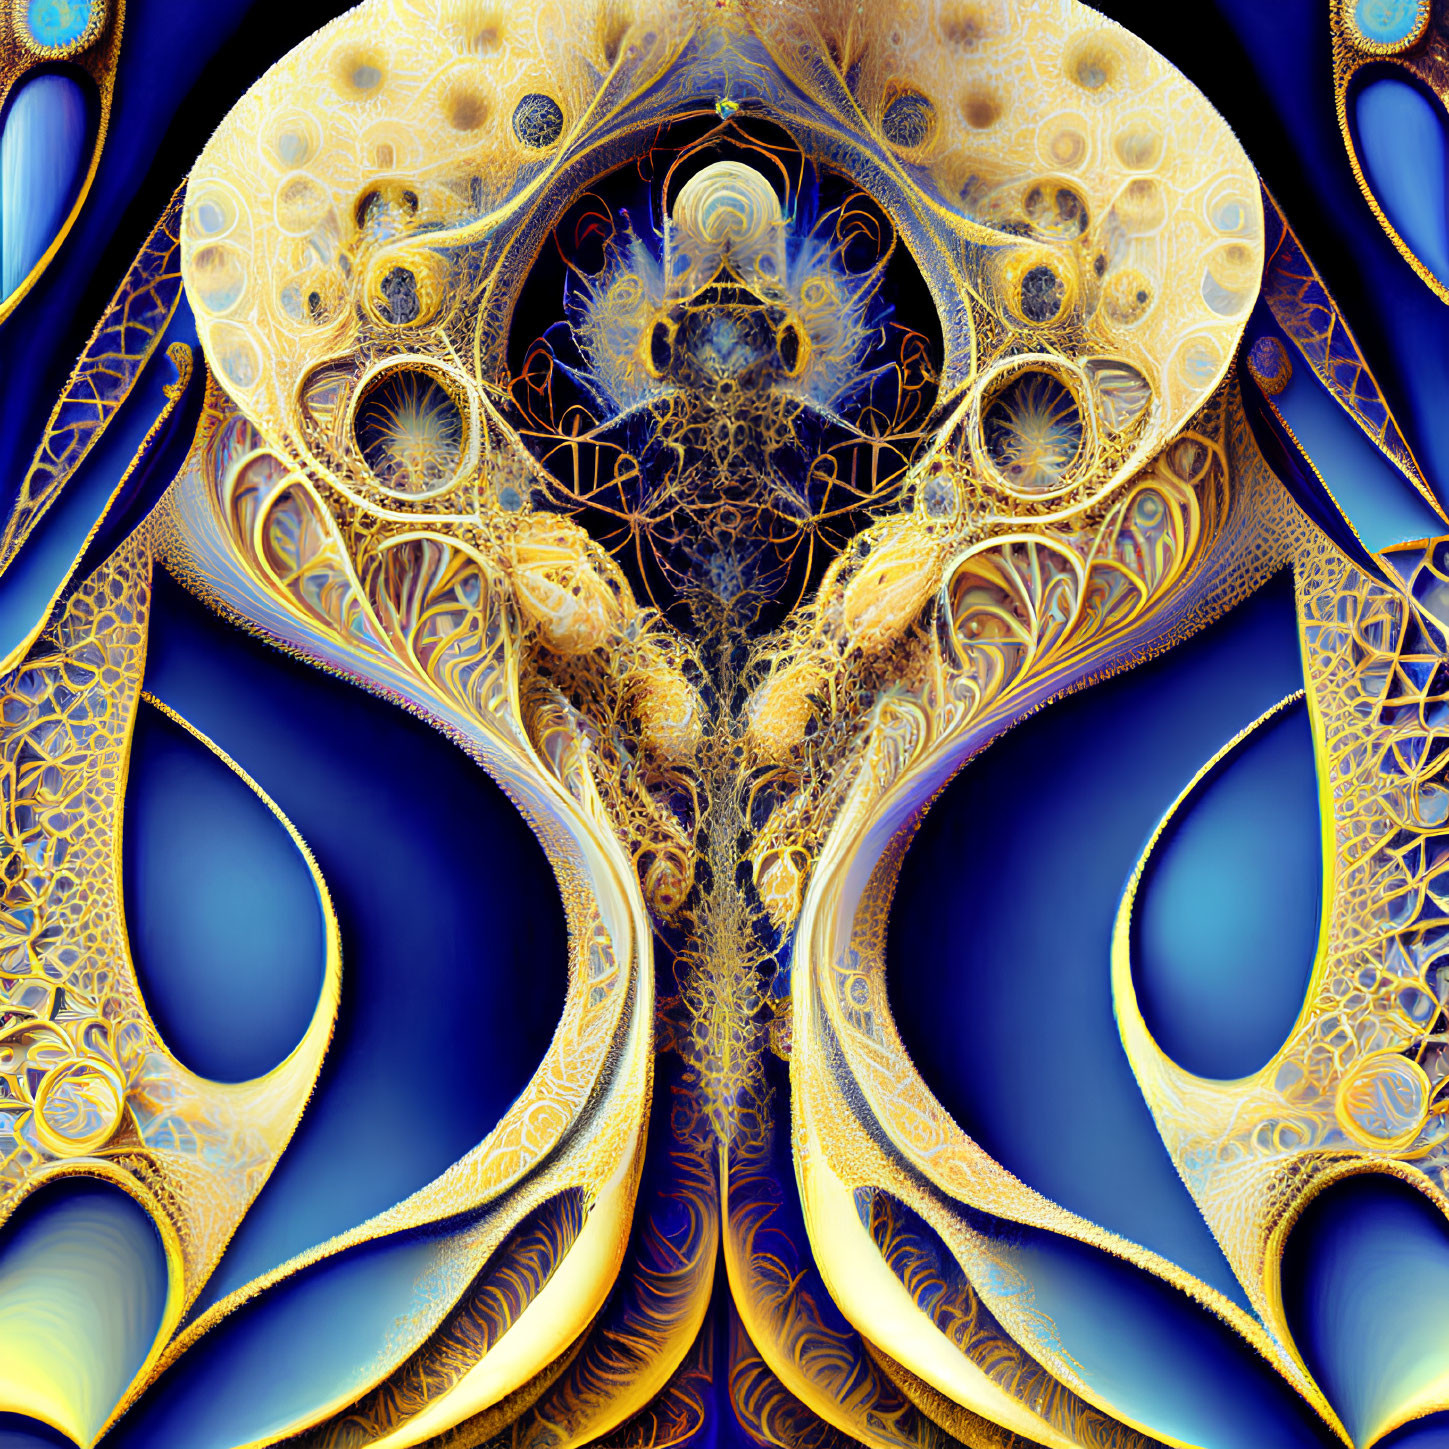 Symmetrical Gold and White Fractal on Deep Blue Background